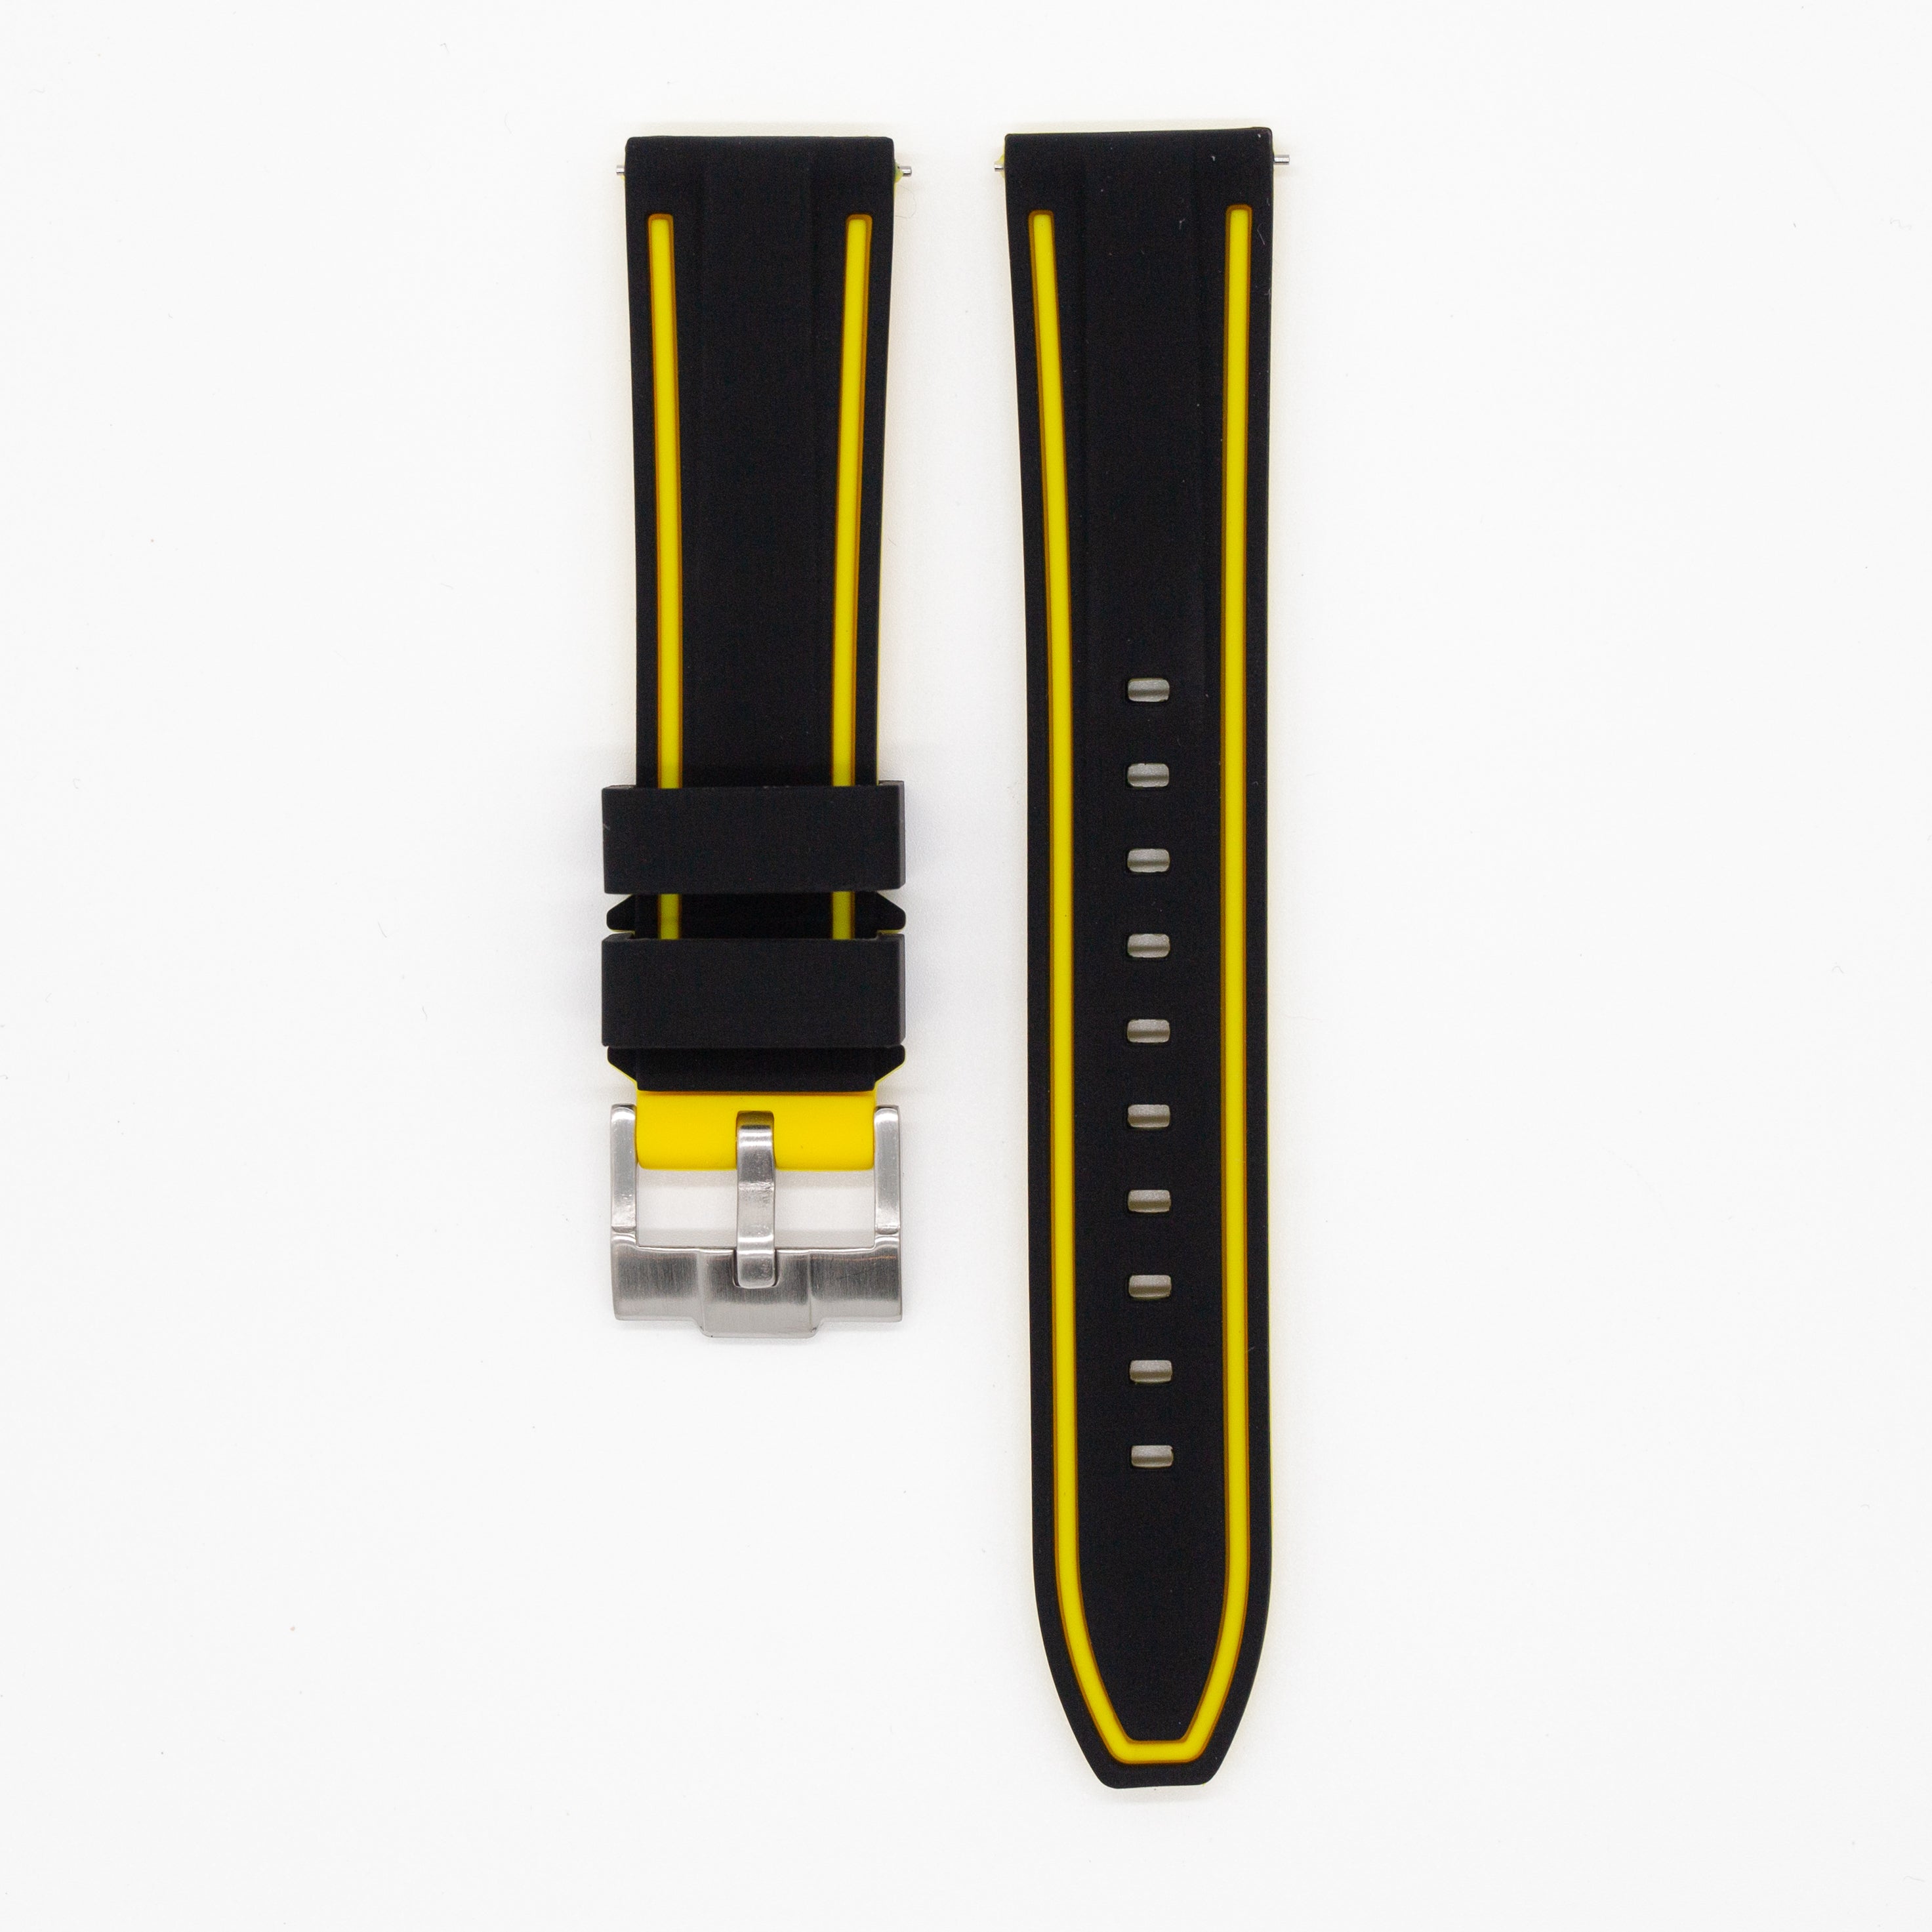 MoonSwatch Outline Strap Black with Yellow Outline